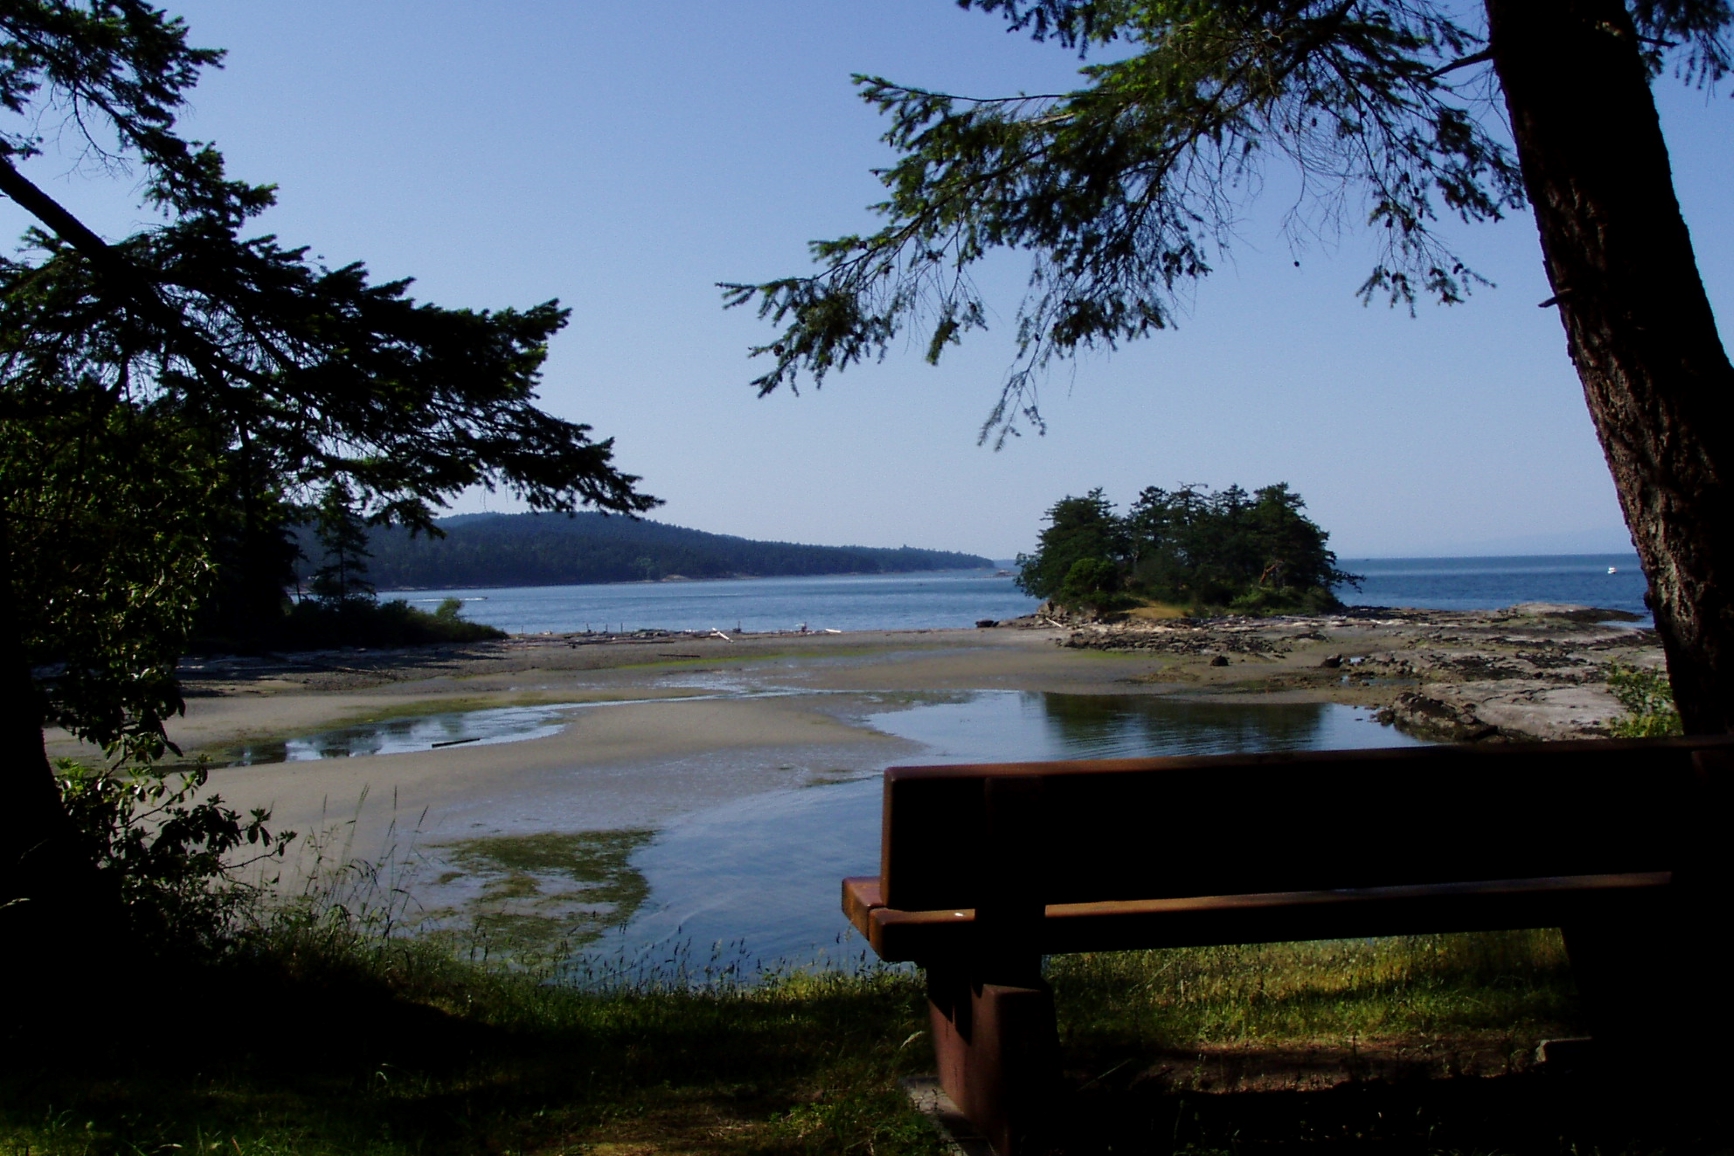 A picnic bench overlooking the sandy beaches and picturesque bays.